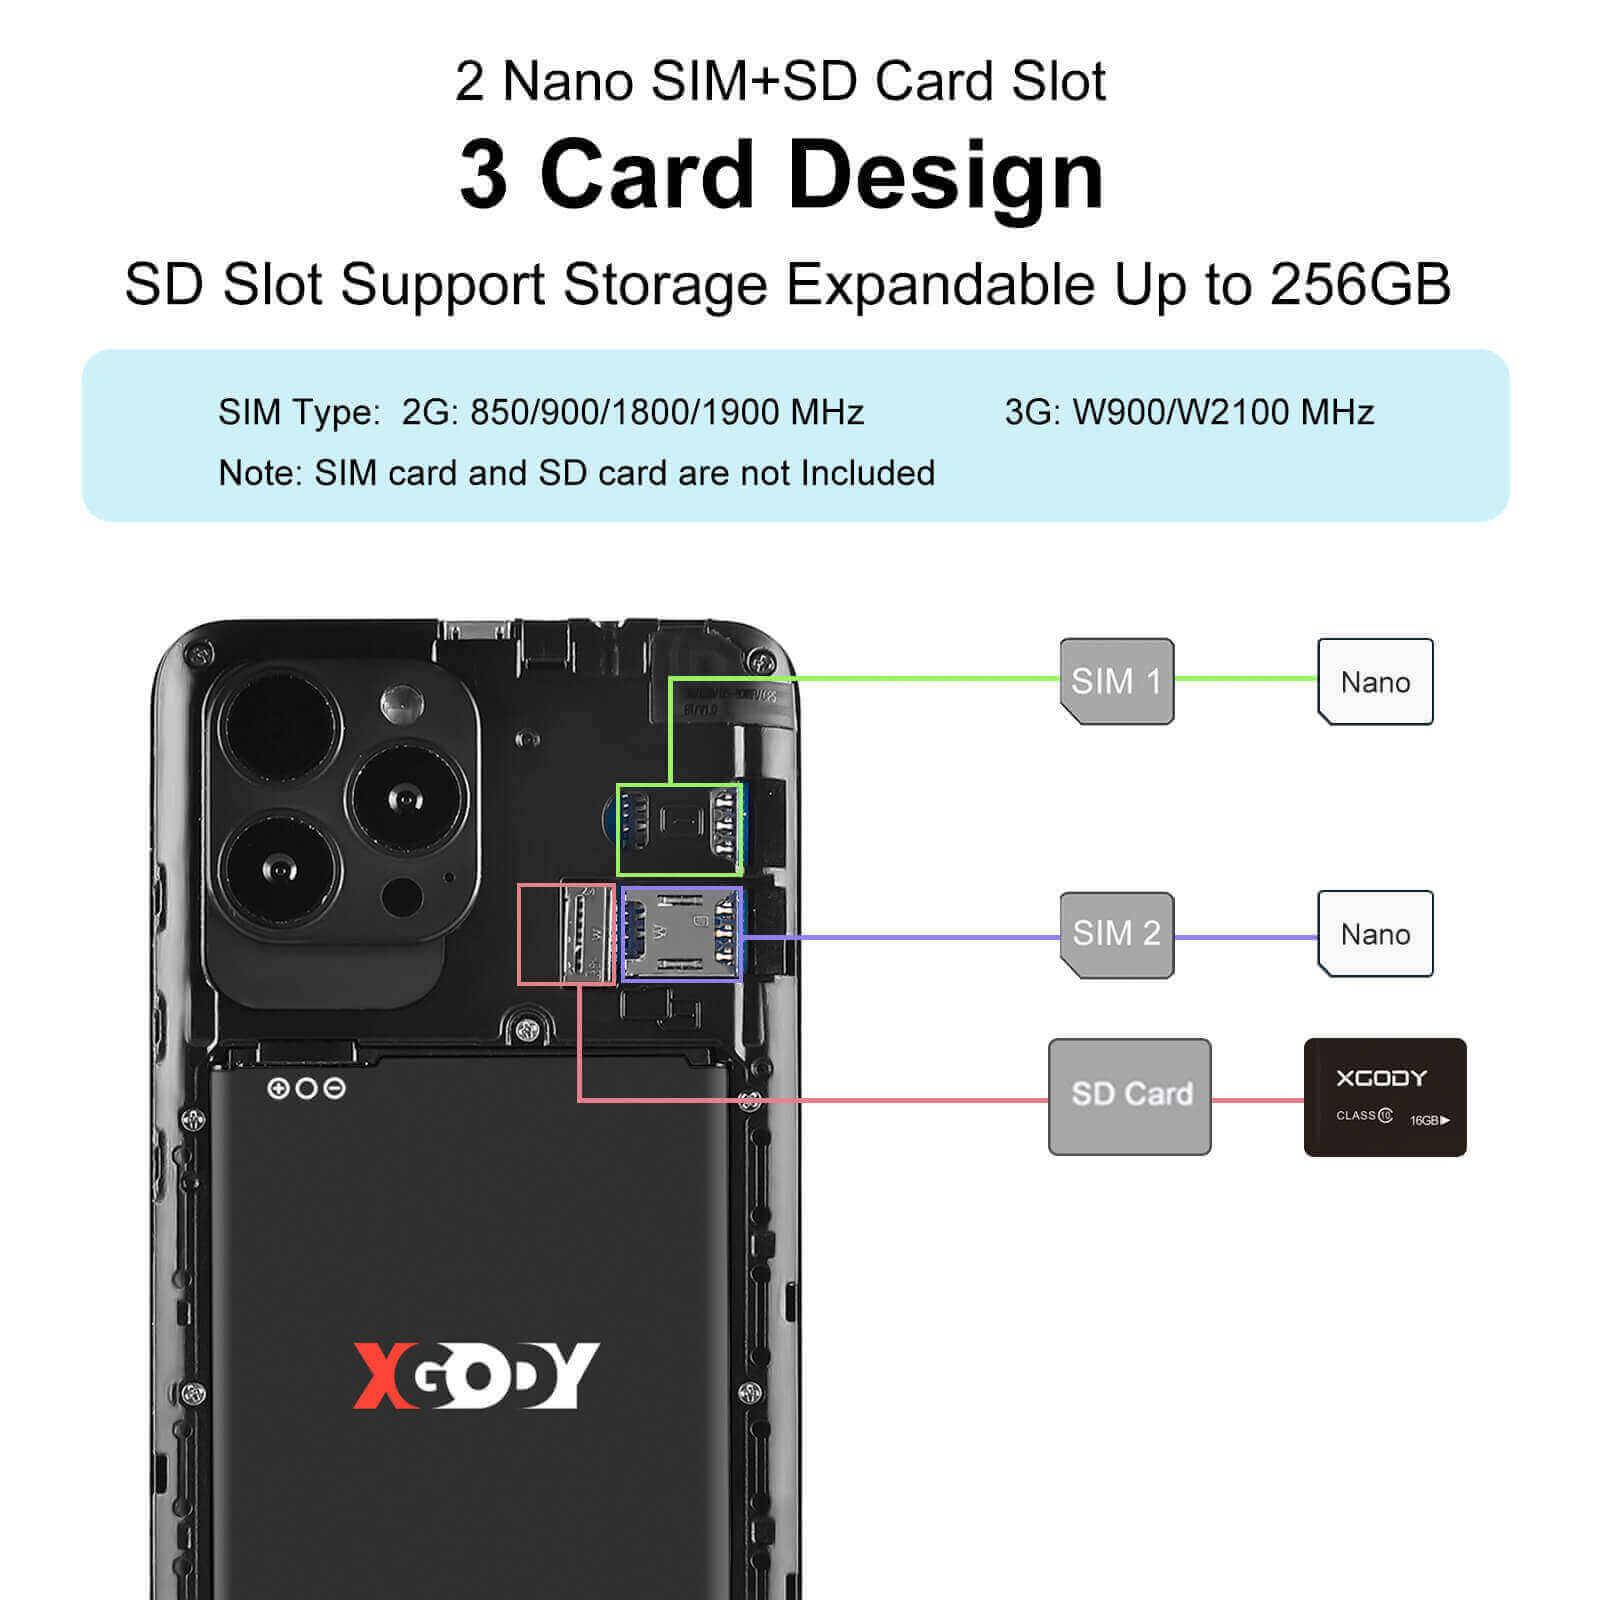 Cost-effective and Most worthwhile XGODY S21 | 5.5" HD Screen, Android 9.0, Small & Sleek Design, Face Unlock - XGODY 